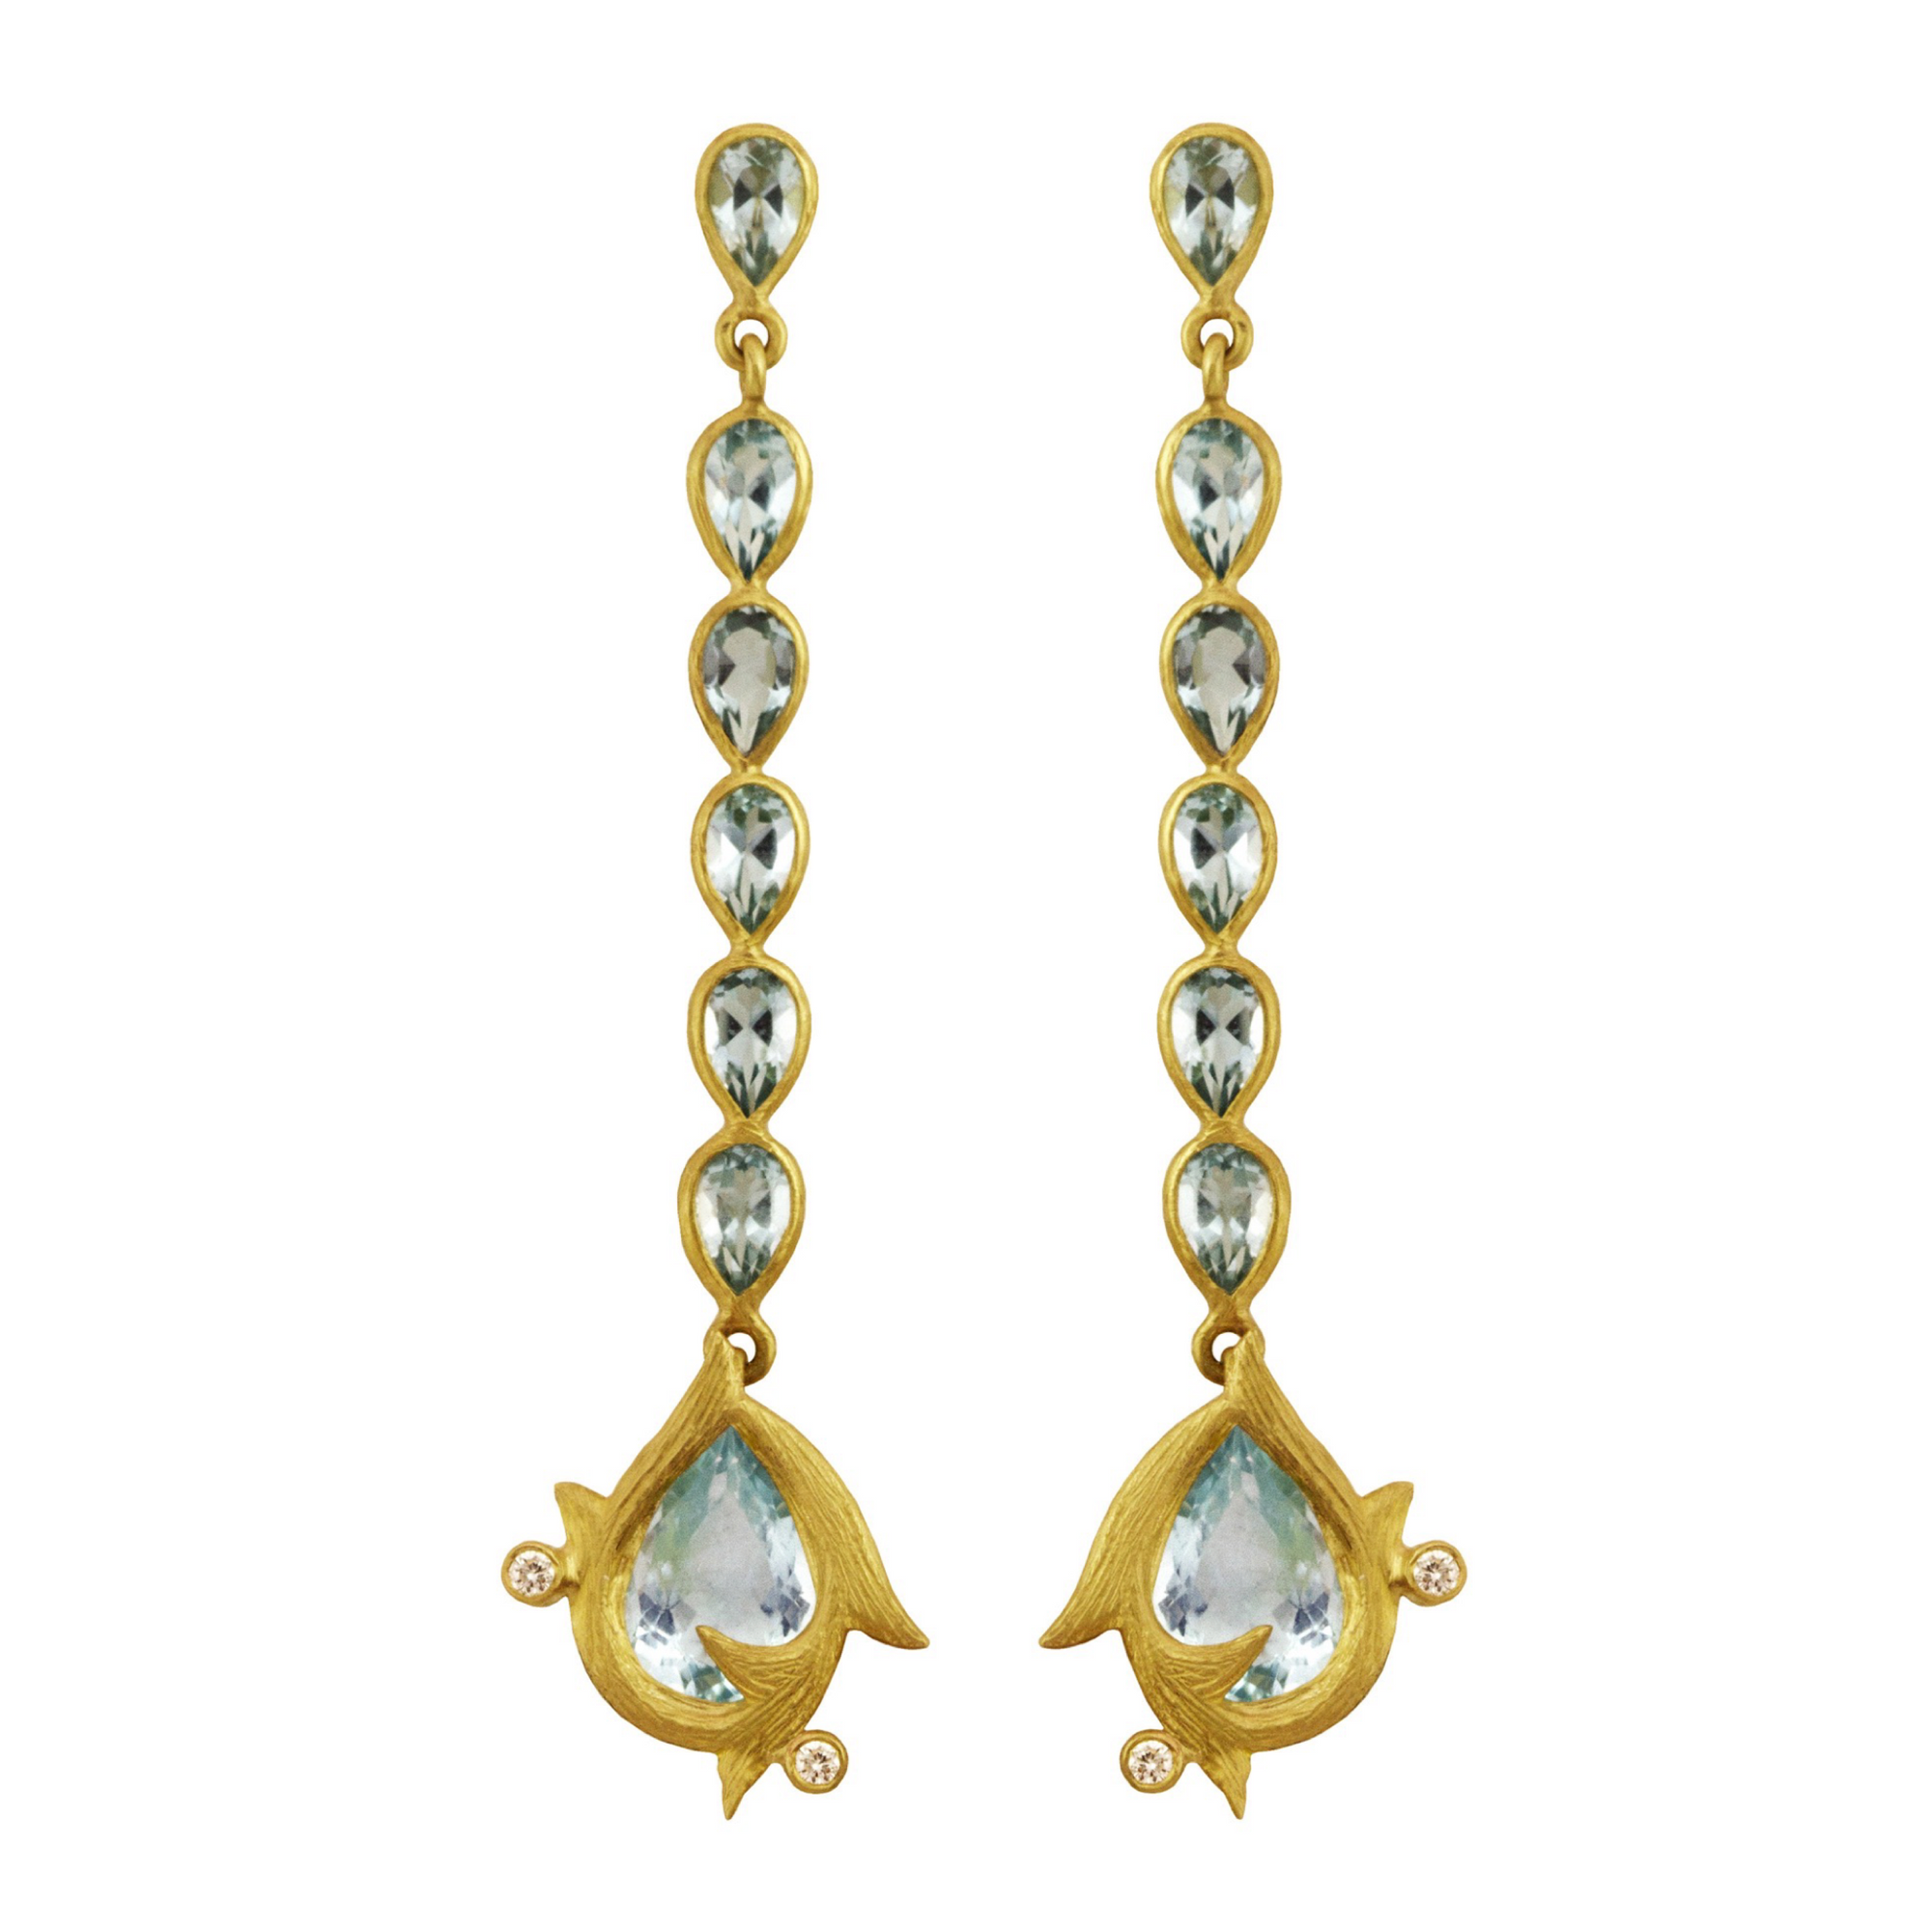 Aquamarine Vine Stick Earrings by Laurie Kaiser available at Talisman Collection Fine Jewelers in El Dorado Hills, CA and online. Expertly crafted in 18k yellow gold, these earrings feature faceted aquamarines and 0.06 carats of white brilliant diamonds. With their elegant and delicate design, they exude sophistication without being too flashy.